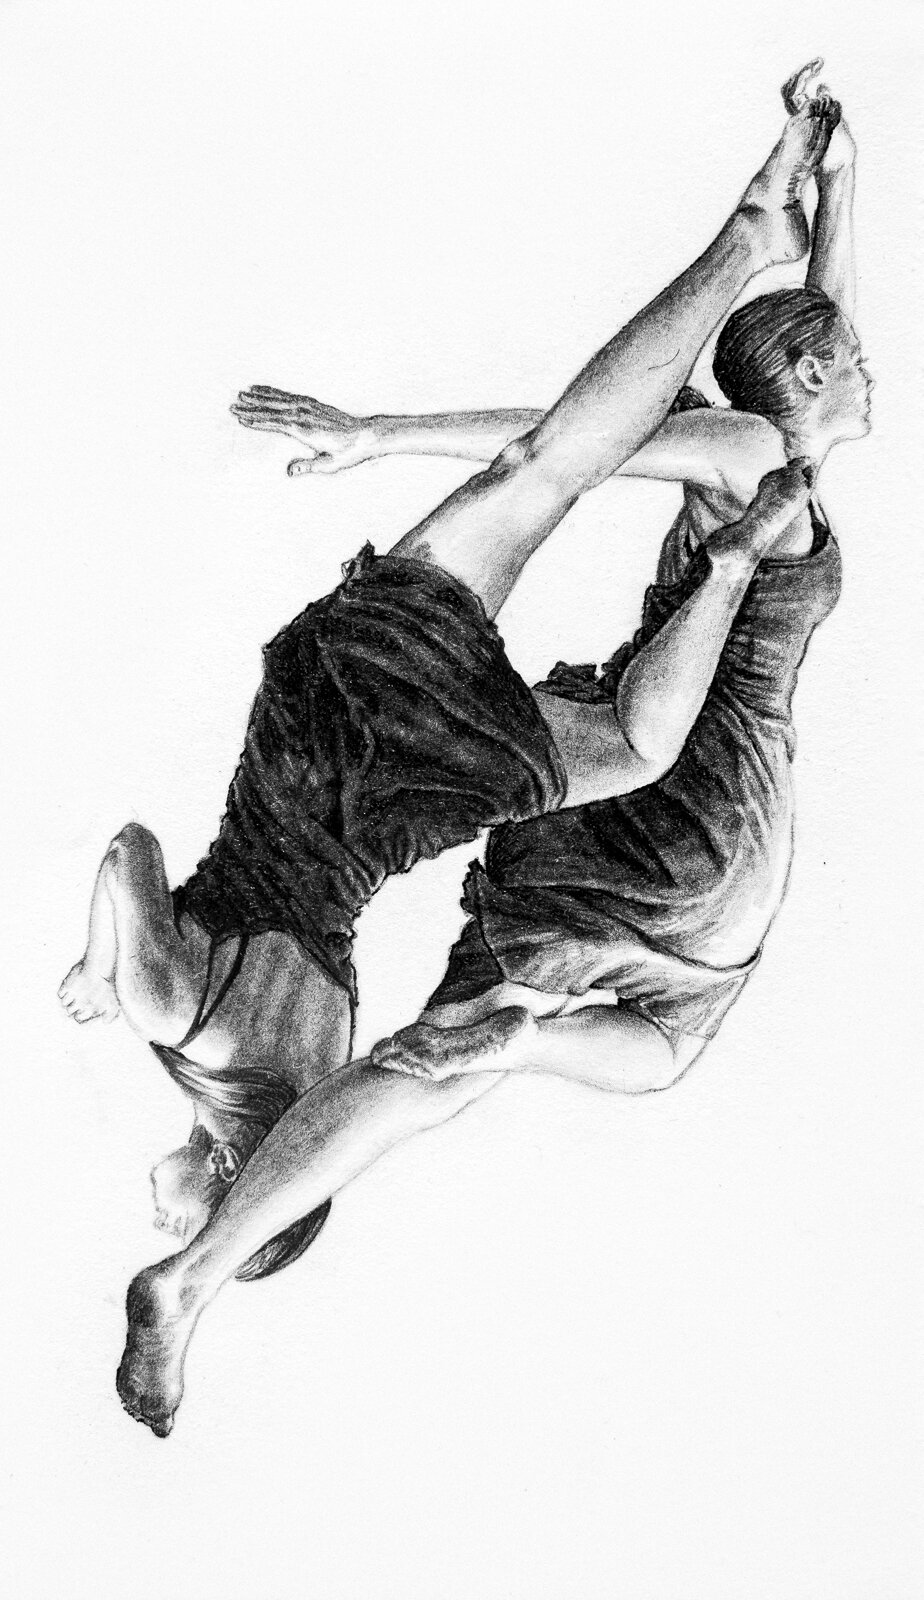 HARP - SOLD | 5 X 3 INCHES | GRAPHITE AND INK ON PAPER | 2012